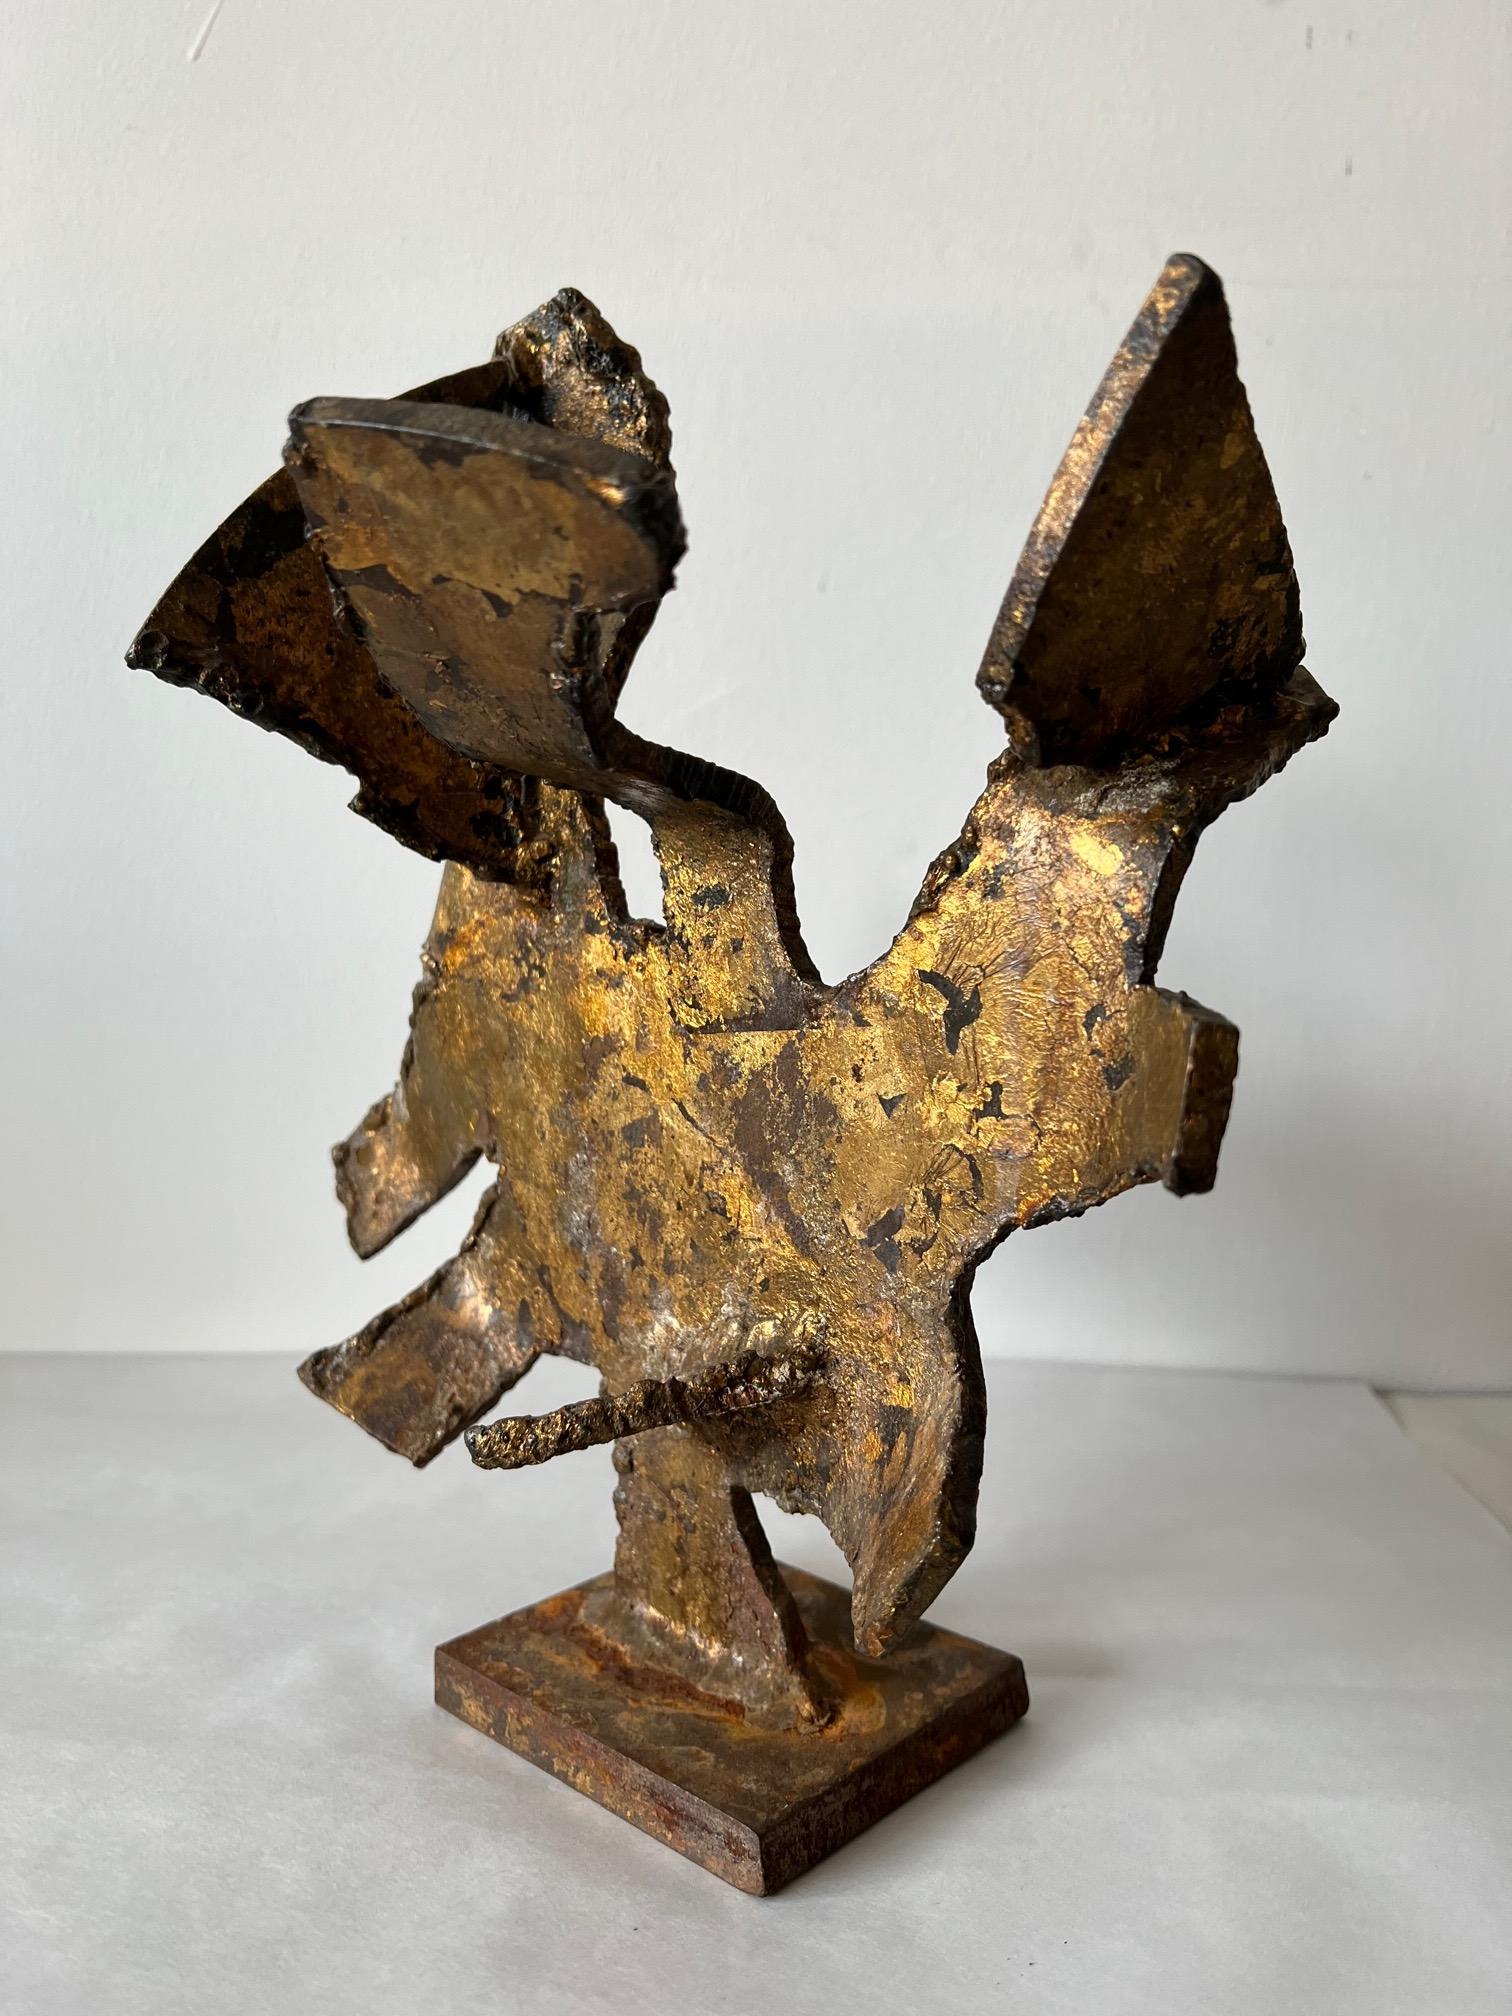 A really wonderful torch cut, brutalist sculpture by Jack Van Deckter, ca' 1960's. Patinated wrought iron-heavy. Abstract but with a figurative feel. Jack Van Deckter (American, 1917-1996) was a painter, sculptor, master engraver, author, NYU & Art